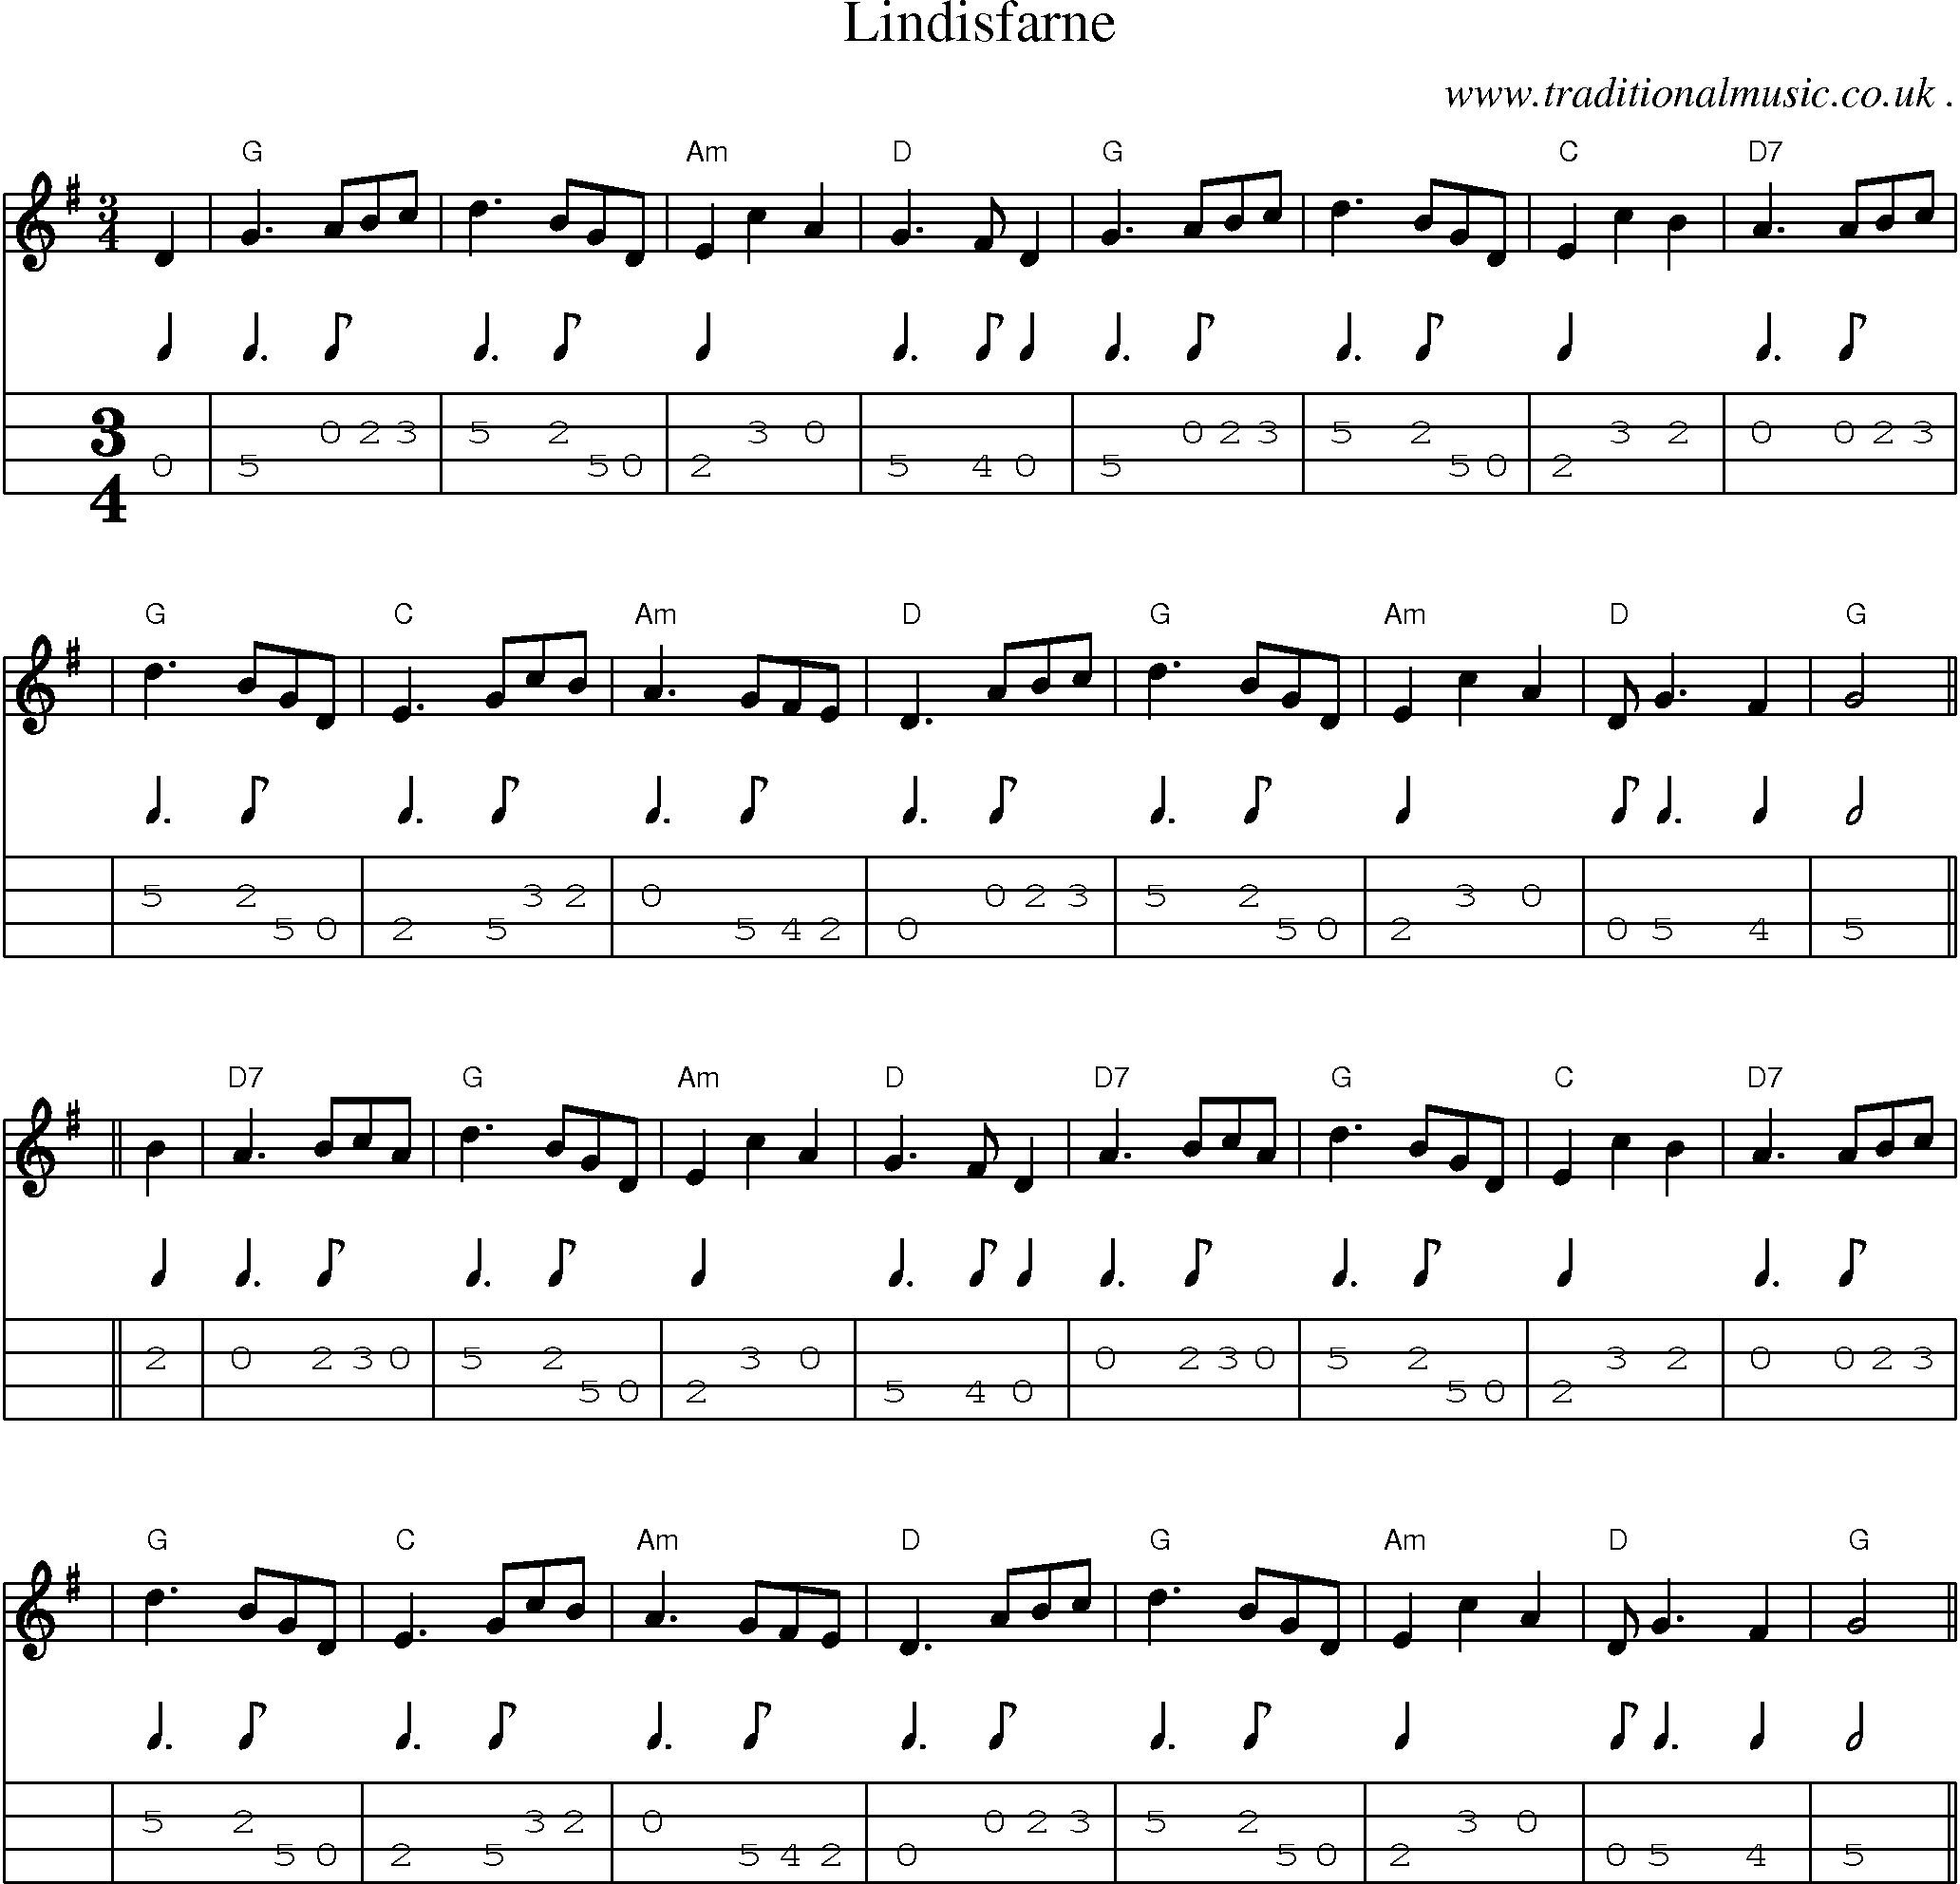 Sheet-music  score, Chords and Mandolin Tabs for Lindisfarne